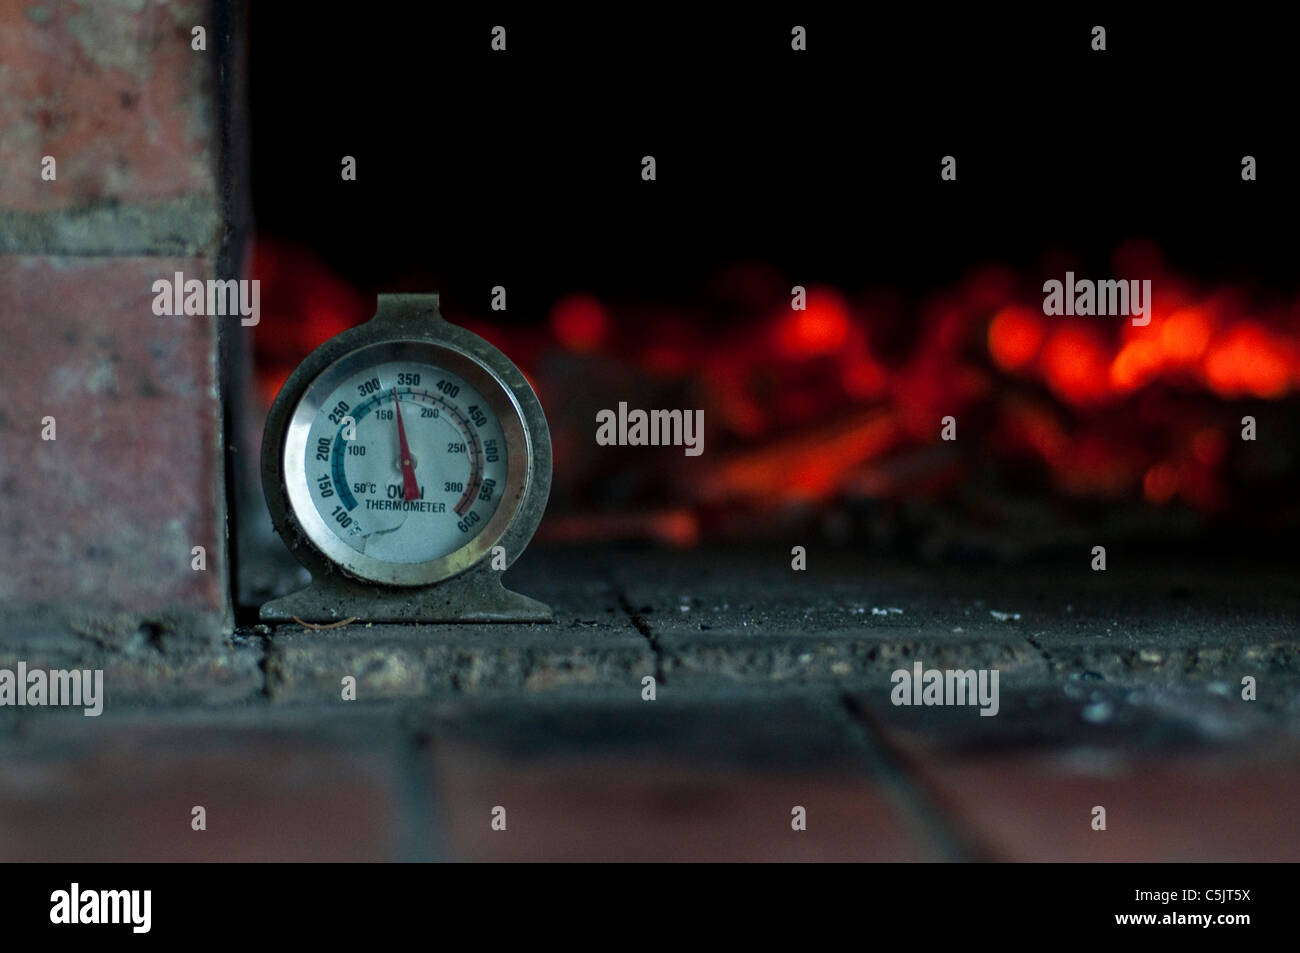 https://c8.alamy.com/comp/C5JT5X/thermometer-with-glowing-embers-in-an-outdoor-wood-burning-pizza-oven-C5JT5X.jpg